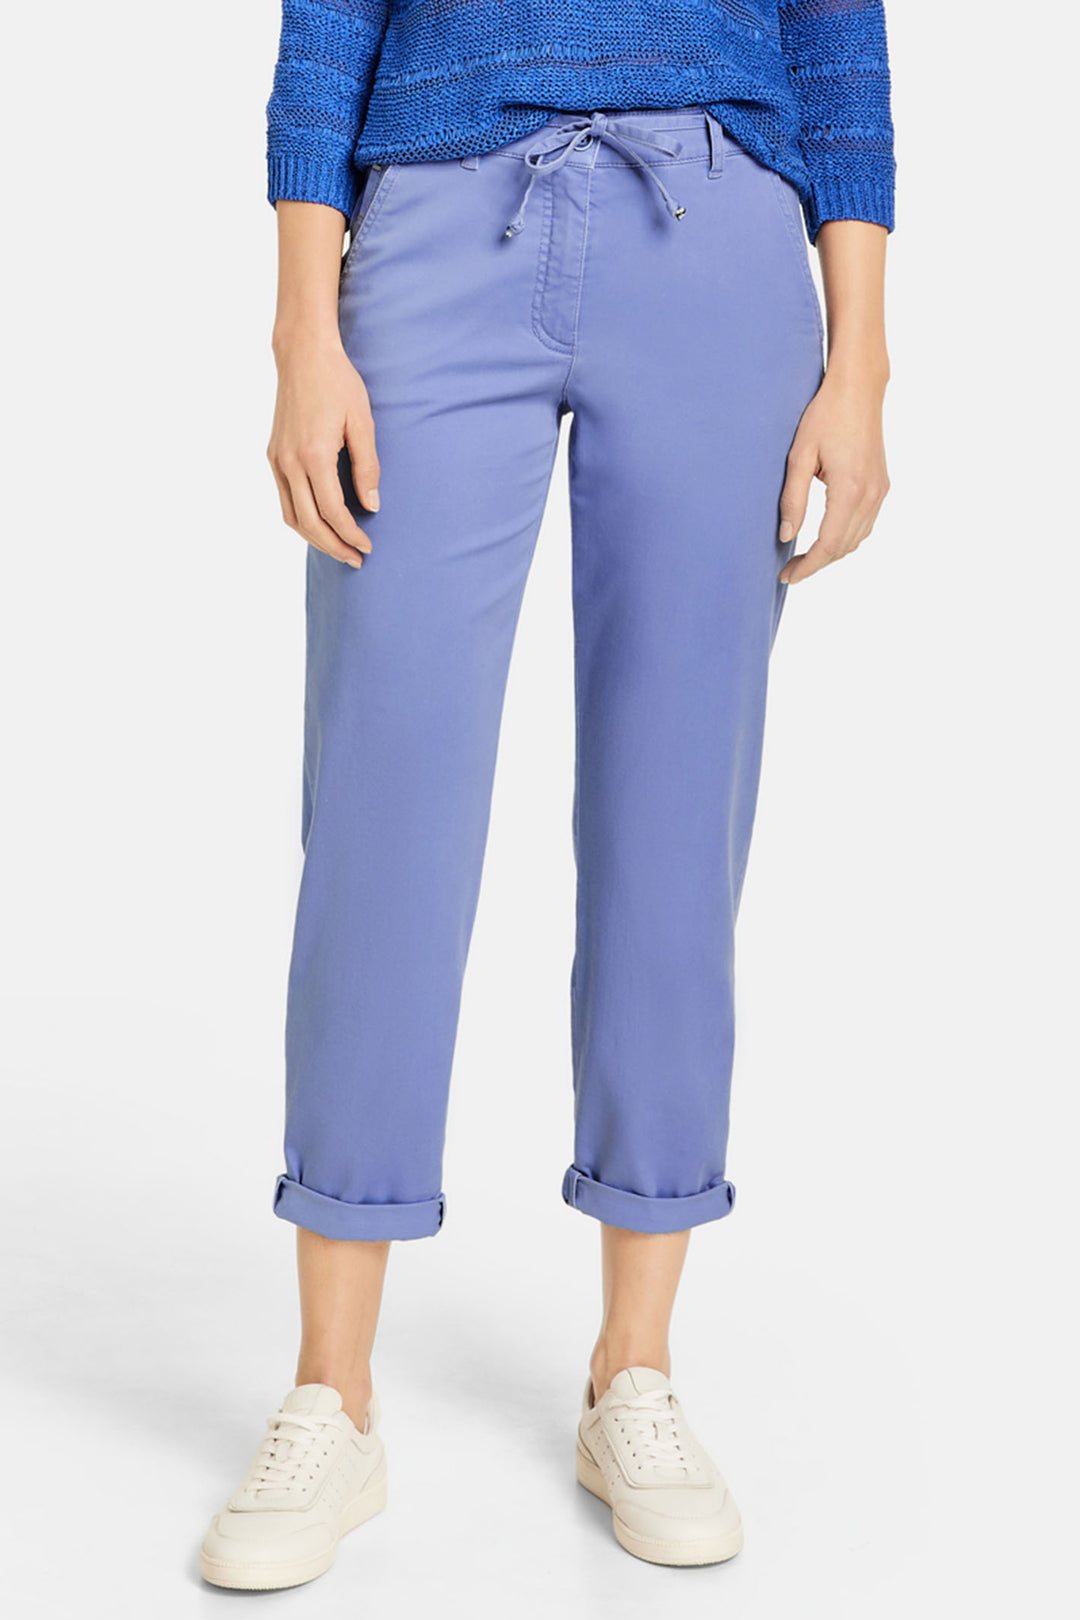 Gerry Weber 925045 Wave Blue Kessy Chino Trousers - Experience Boutique